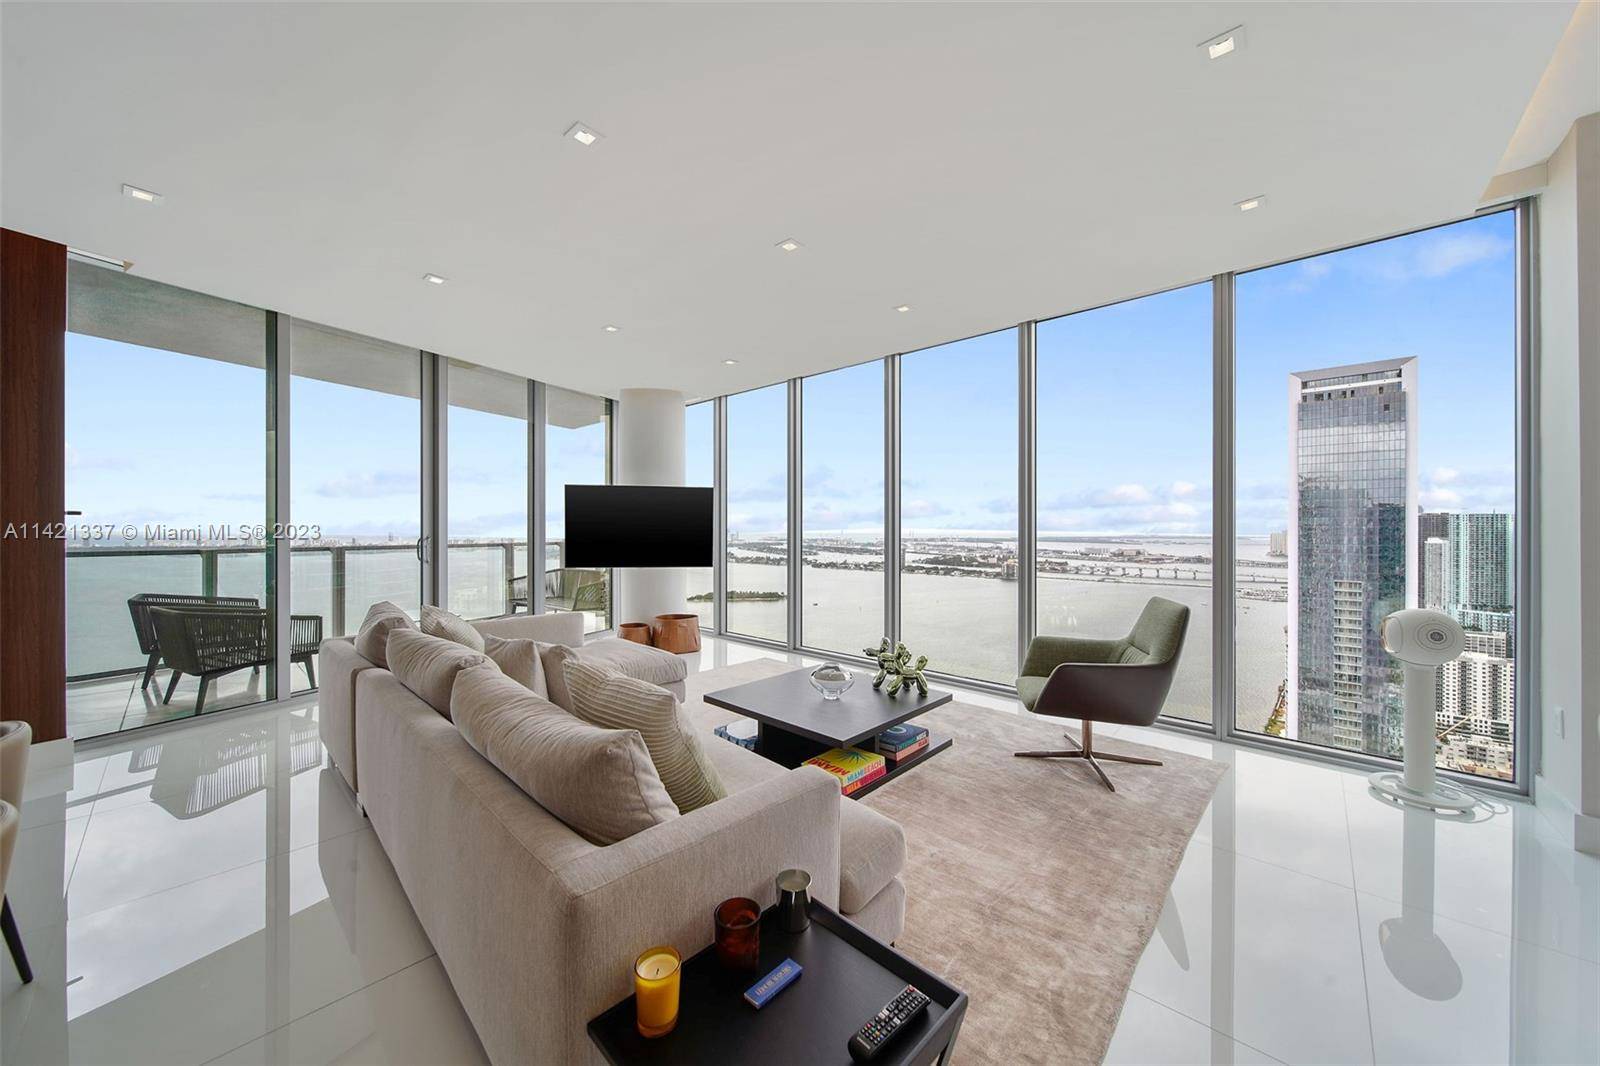 SPECTACULAR HIGH FLOOR BAY SKYLINE VIEWS FROM THIS DESIGNER DESIGNED AND UPGRADED CORNER 3 BED DEN 4 BATH CONDO IN THE MOST COVETED LINE OF EDGEWATER, MIAMI.